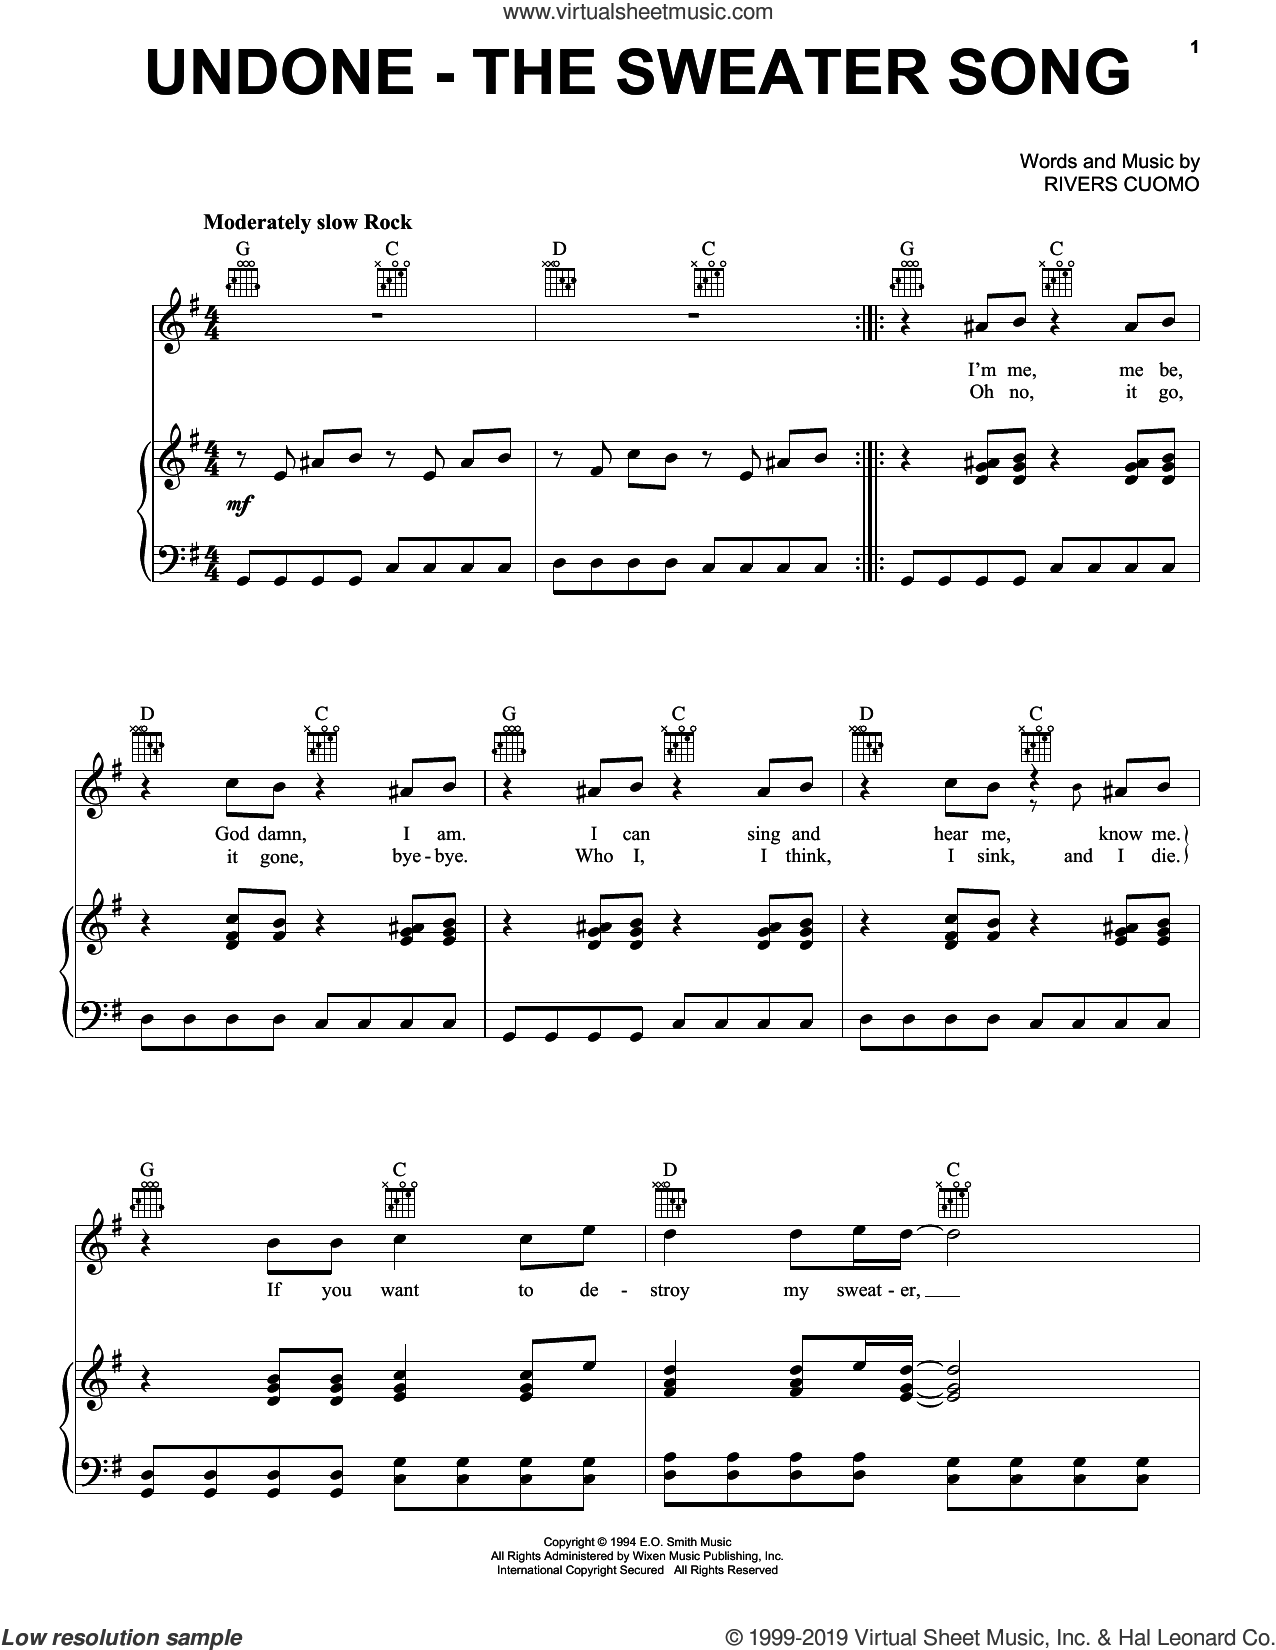 Undone - The Sweater Song sheet music for voice, piano or guitar